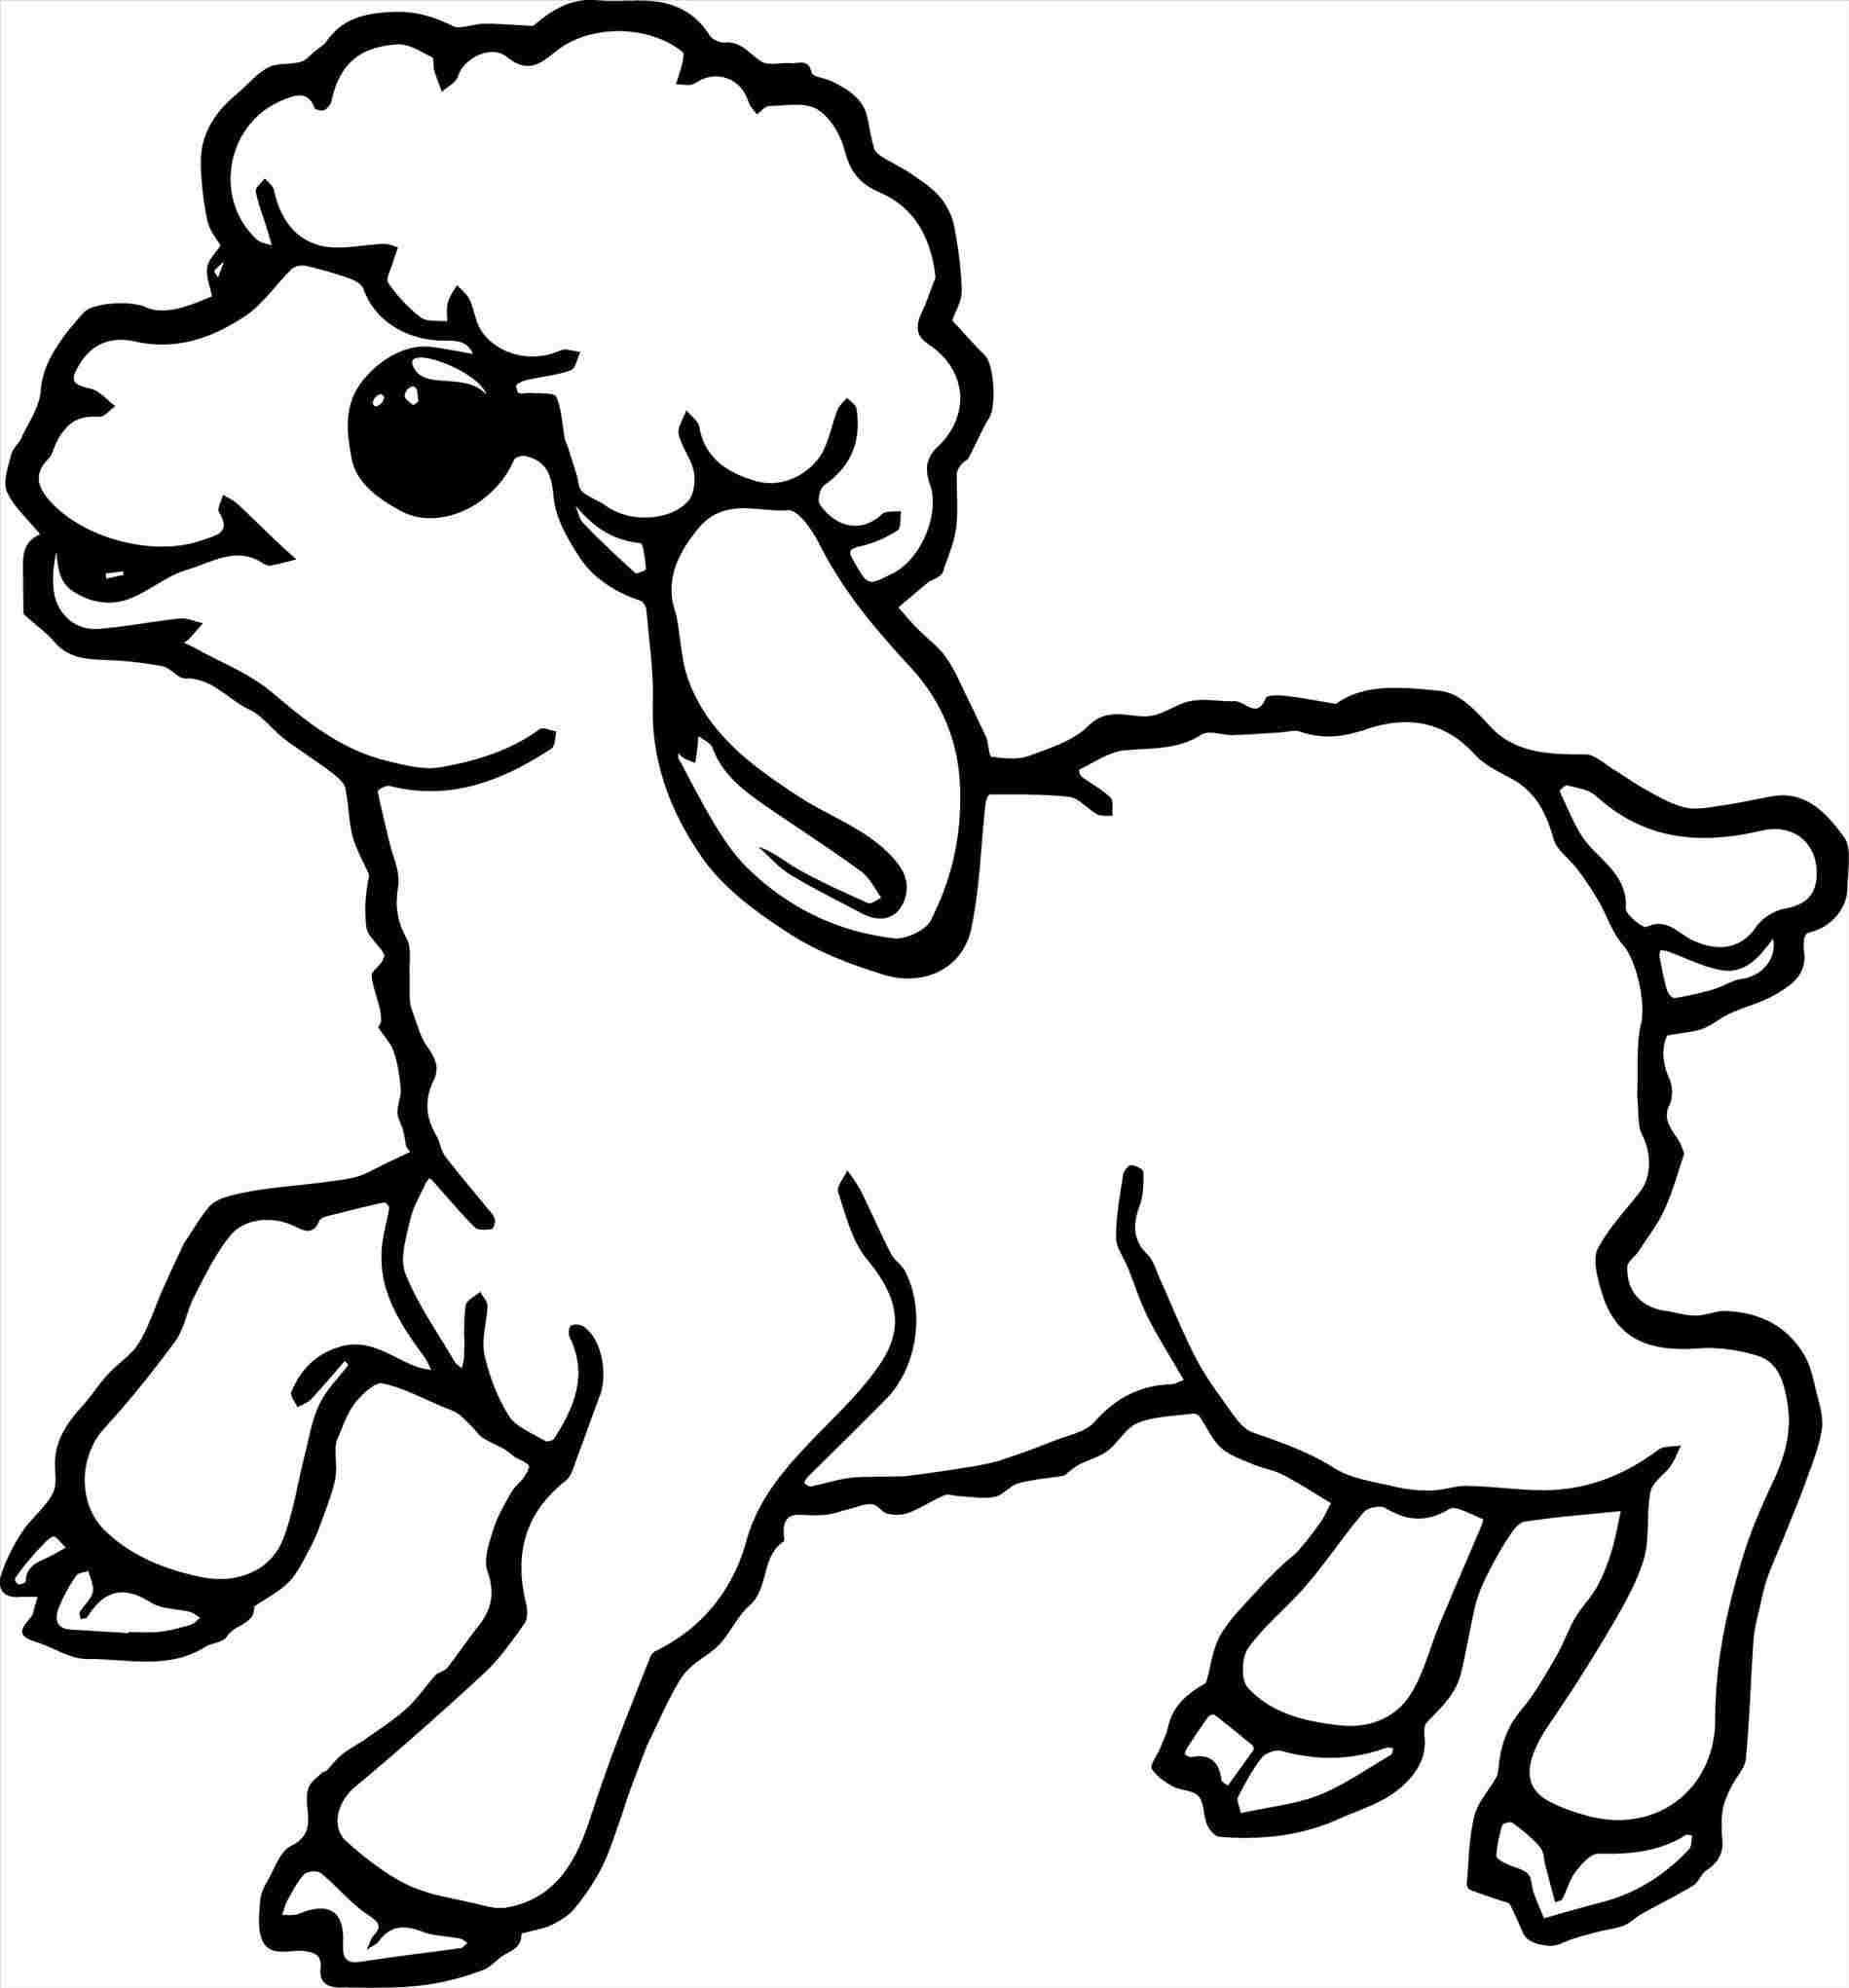 Sheep Face Coloring Page Sheep Paintings Search Result At Paintingvalley